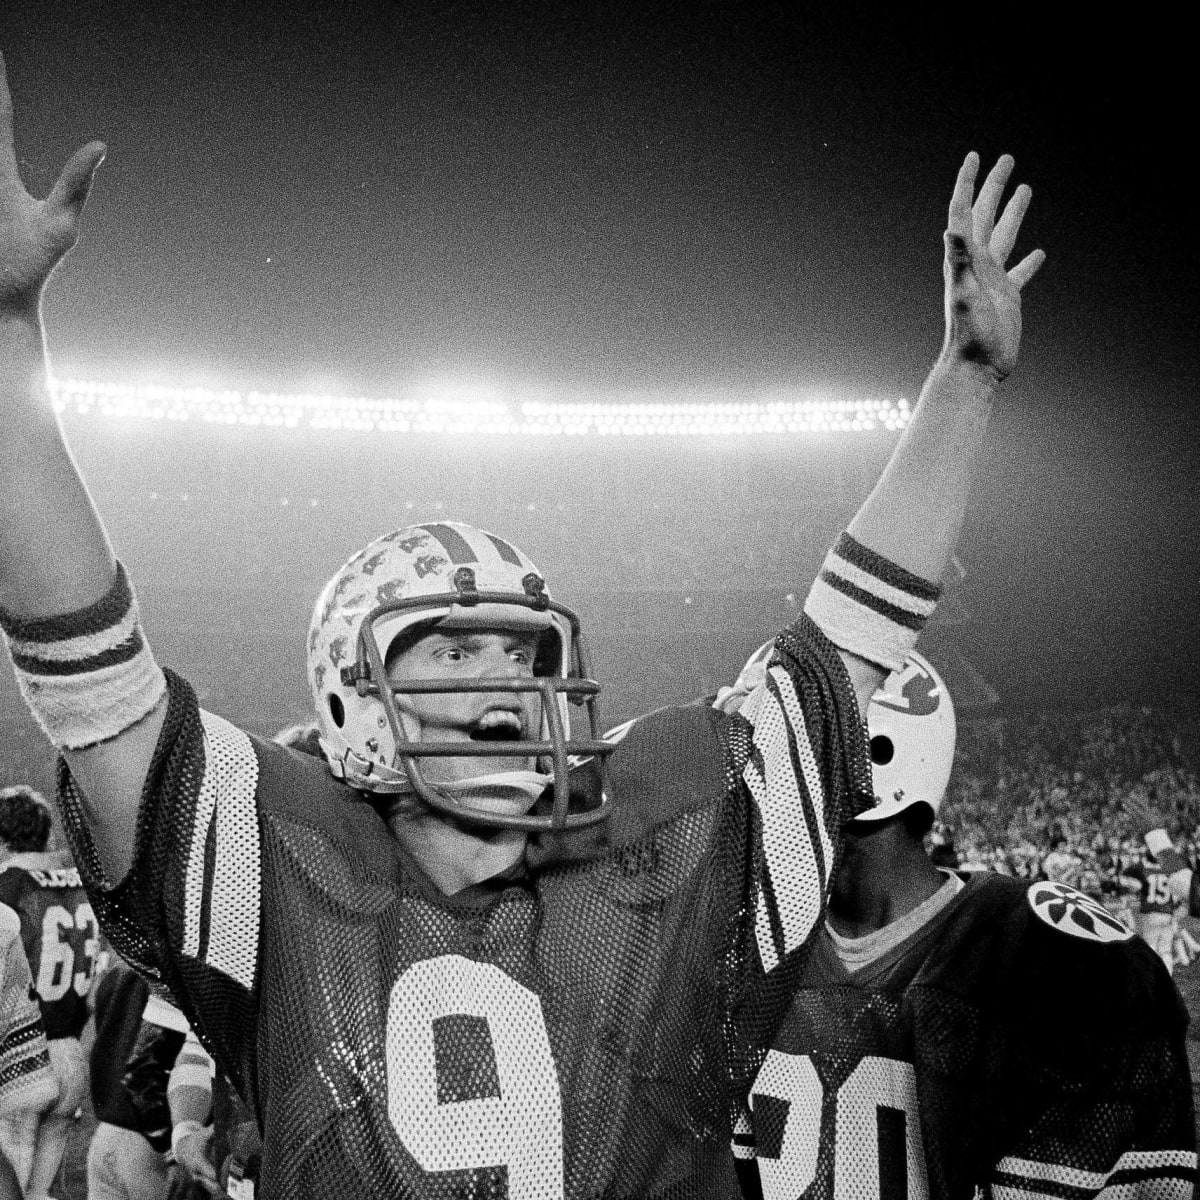 BYU will retire QB Jim McMahon's jersey on Oct. 3, induct him into